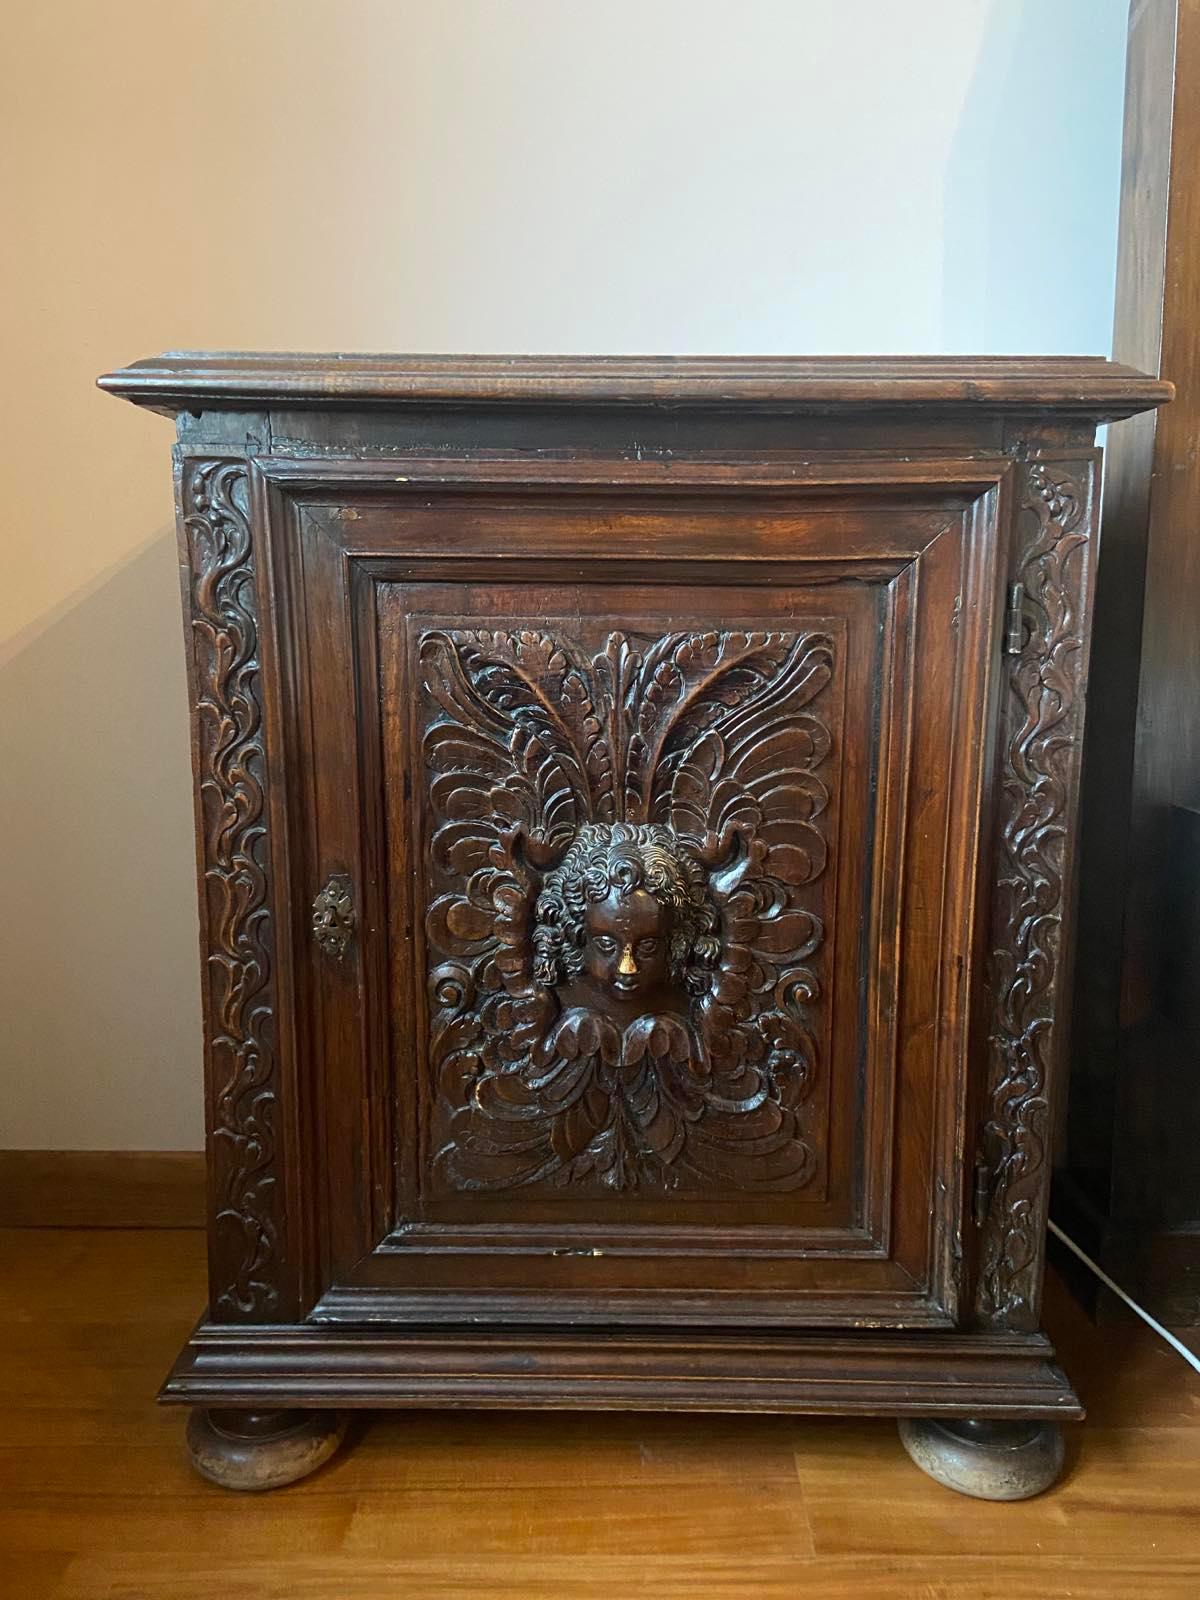 Rectangular support cabinet made of oak opening by a molded door carved with an angel's head in relief in an entourage of foliage scrolls, resting on balls feet.
France, Epoque 17th century
Measures: 85 x 71 x 38 cm.